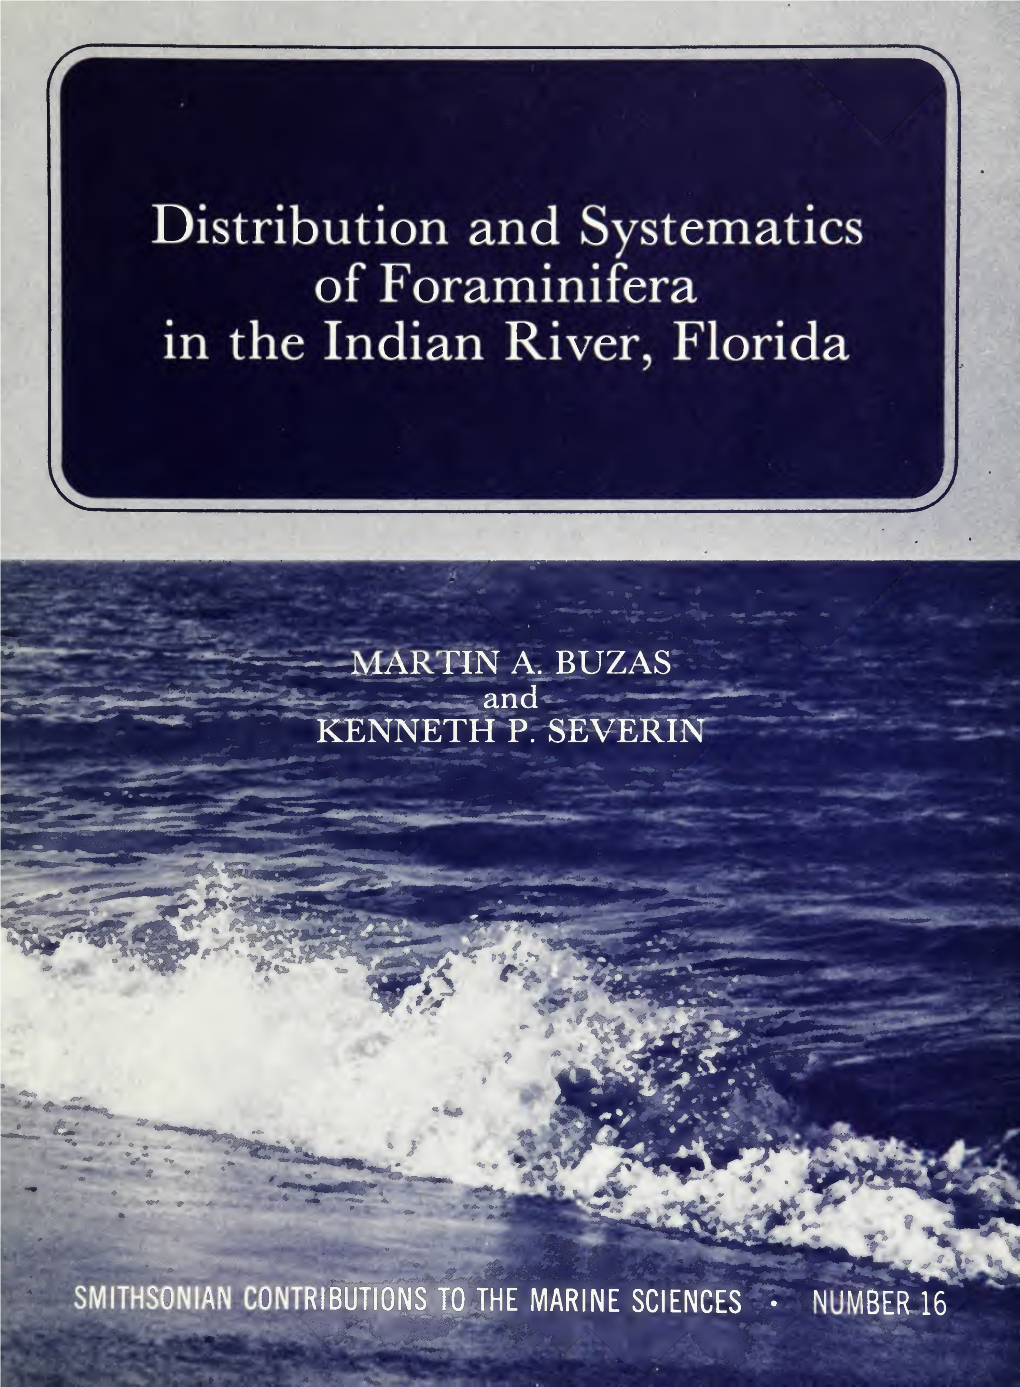 Distribution and Systematics of Foraminifera in the Indian River